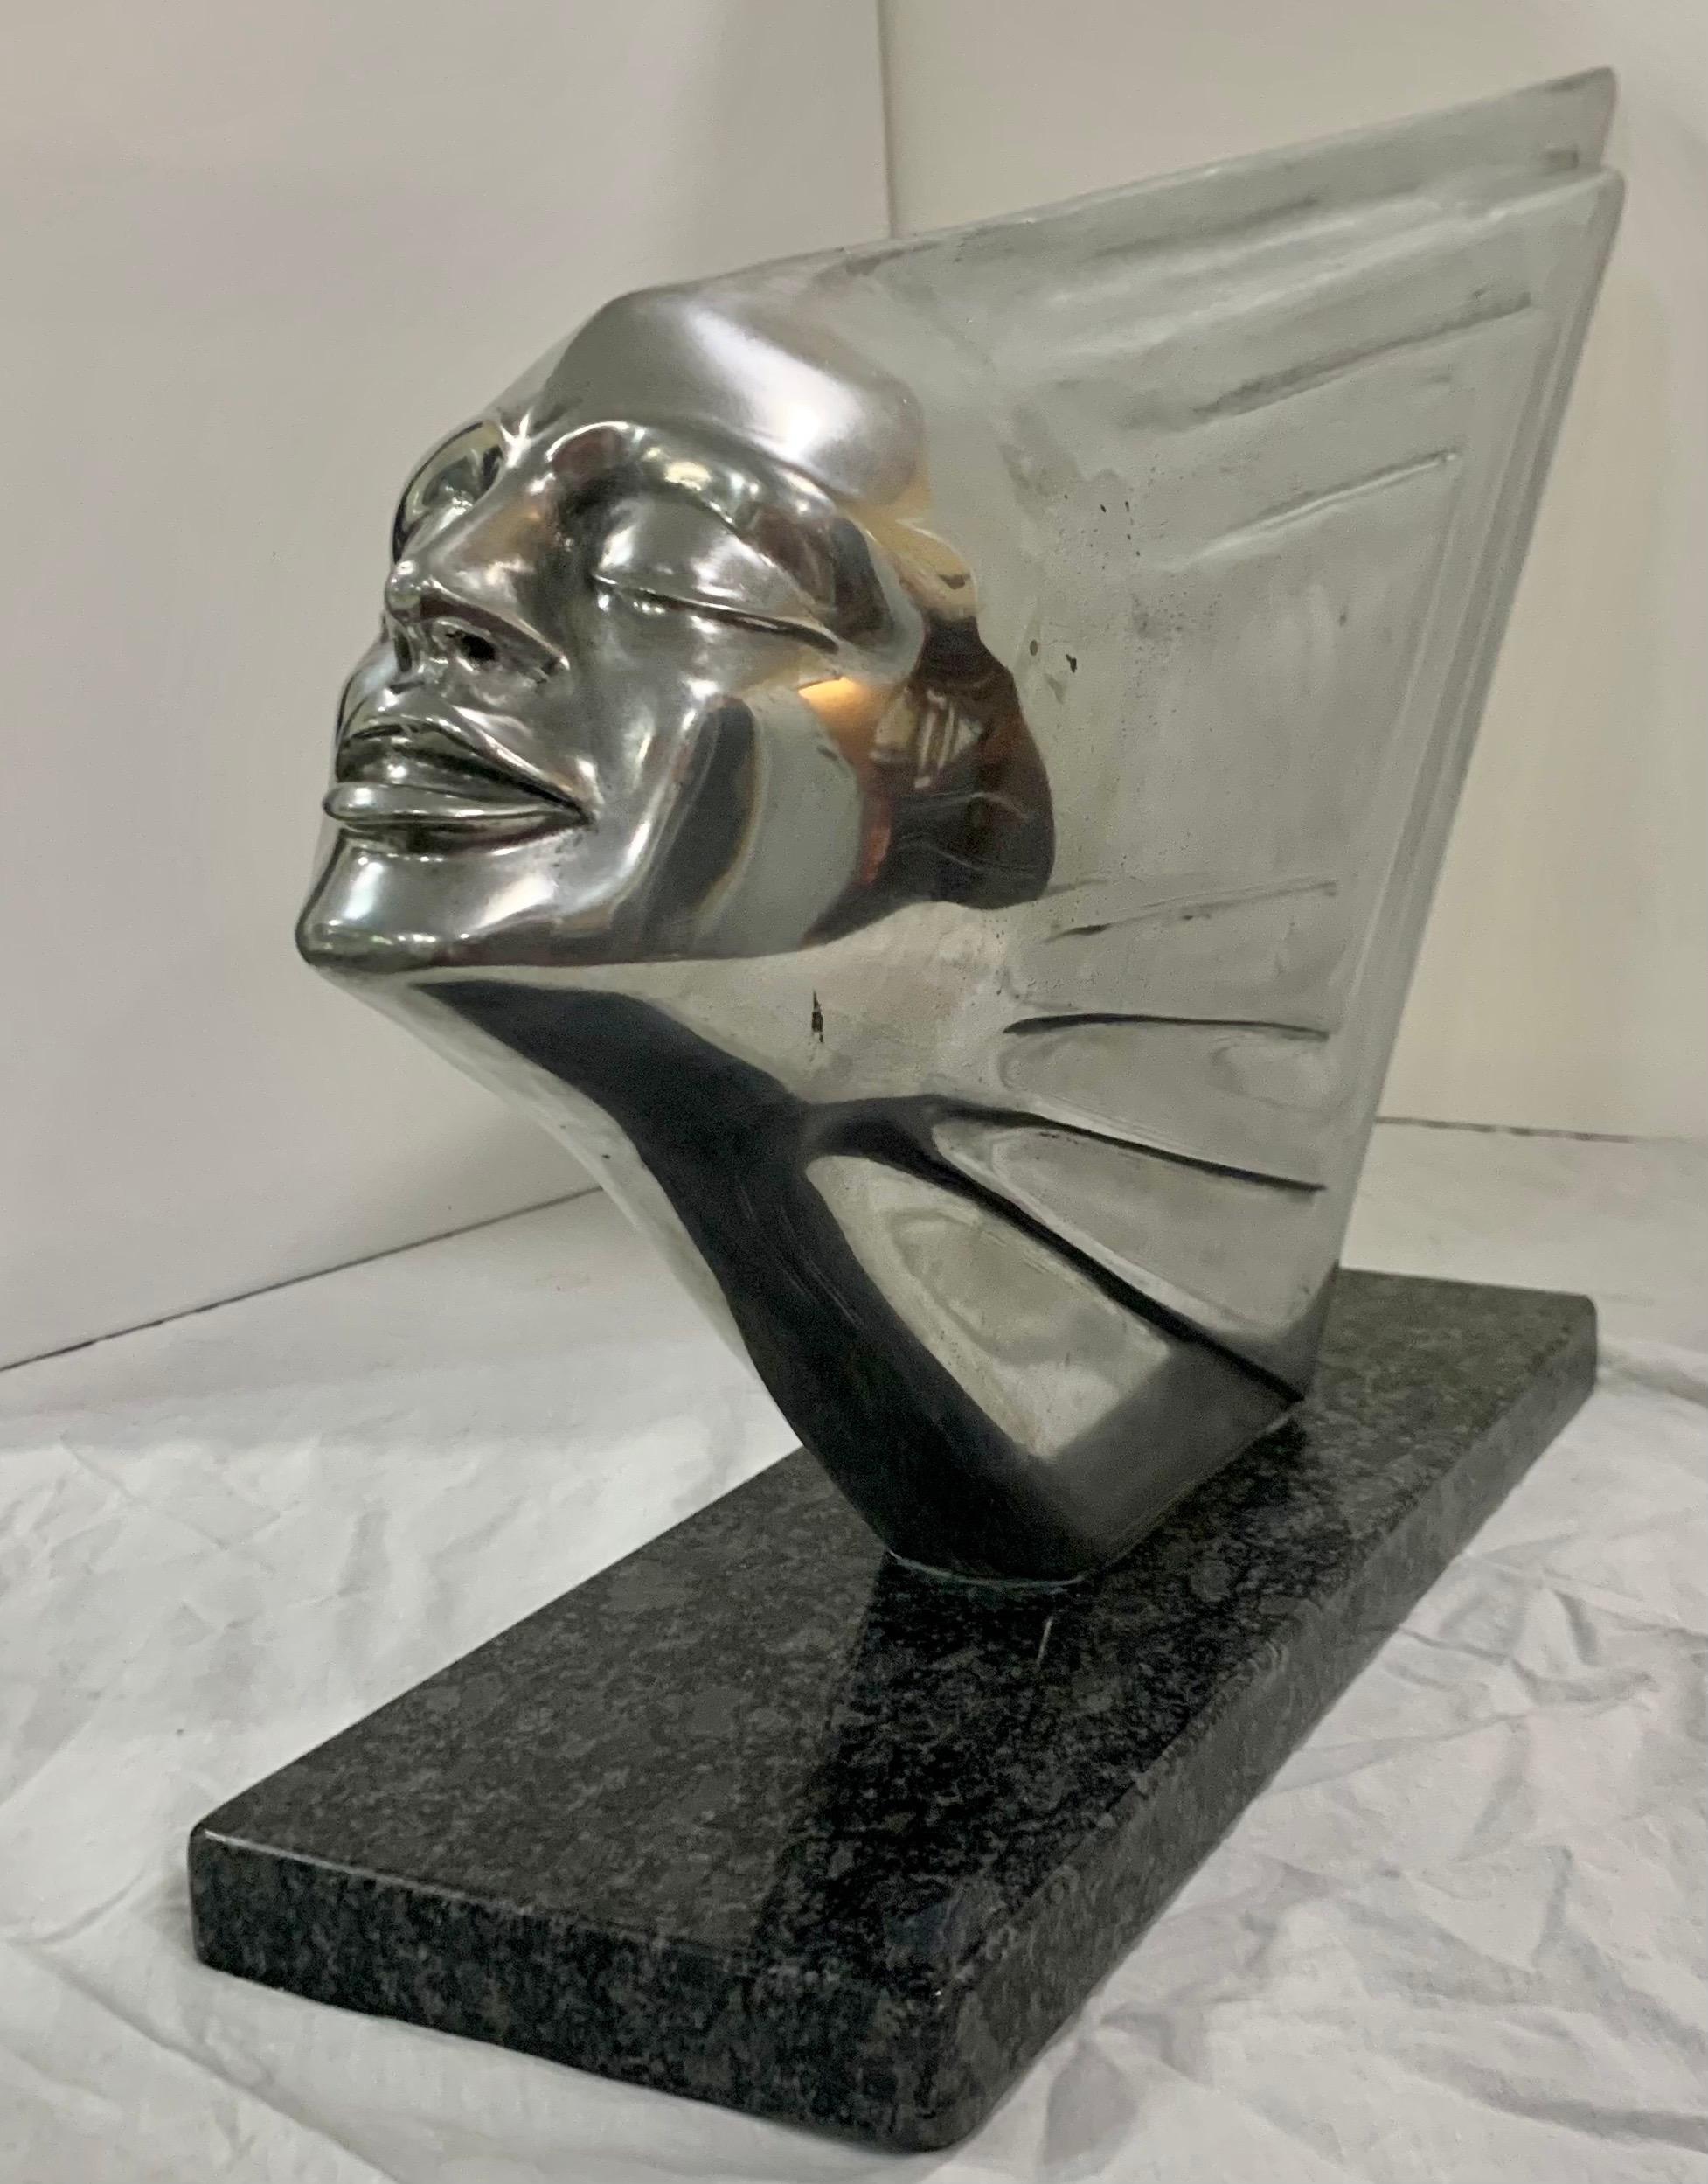 Stunning Lee Duran (1941-2014) aluminum and polished granite sculpture. This important work of art was part of Duran's Chrome Goddess Series Siren Sculptures. There are only five of this sculpture and another five of a slightly smaller sculpture